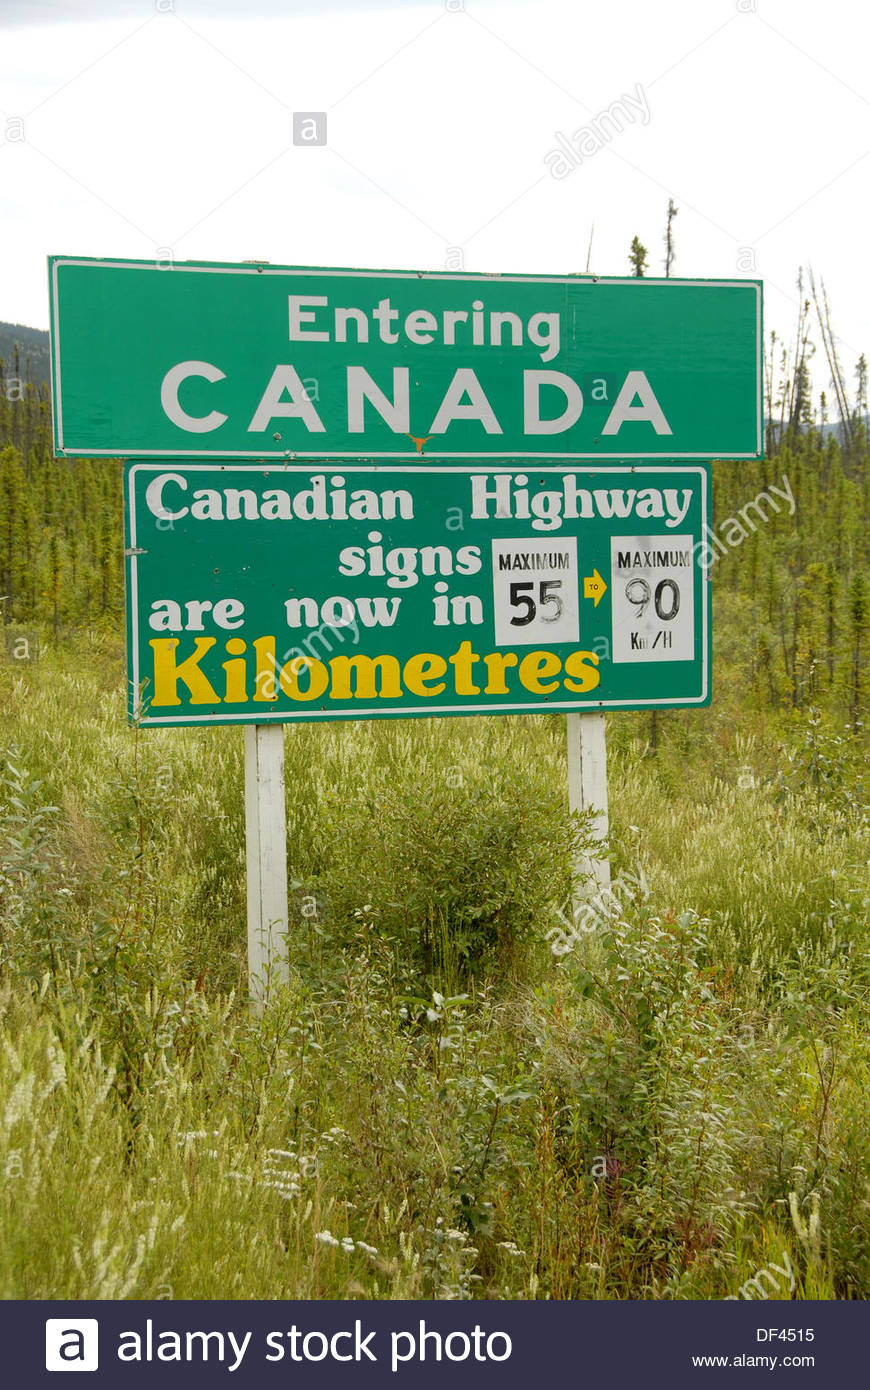 Canada’s Border Policy Doesn’t Scale